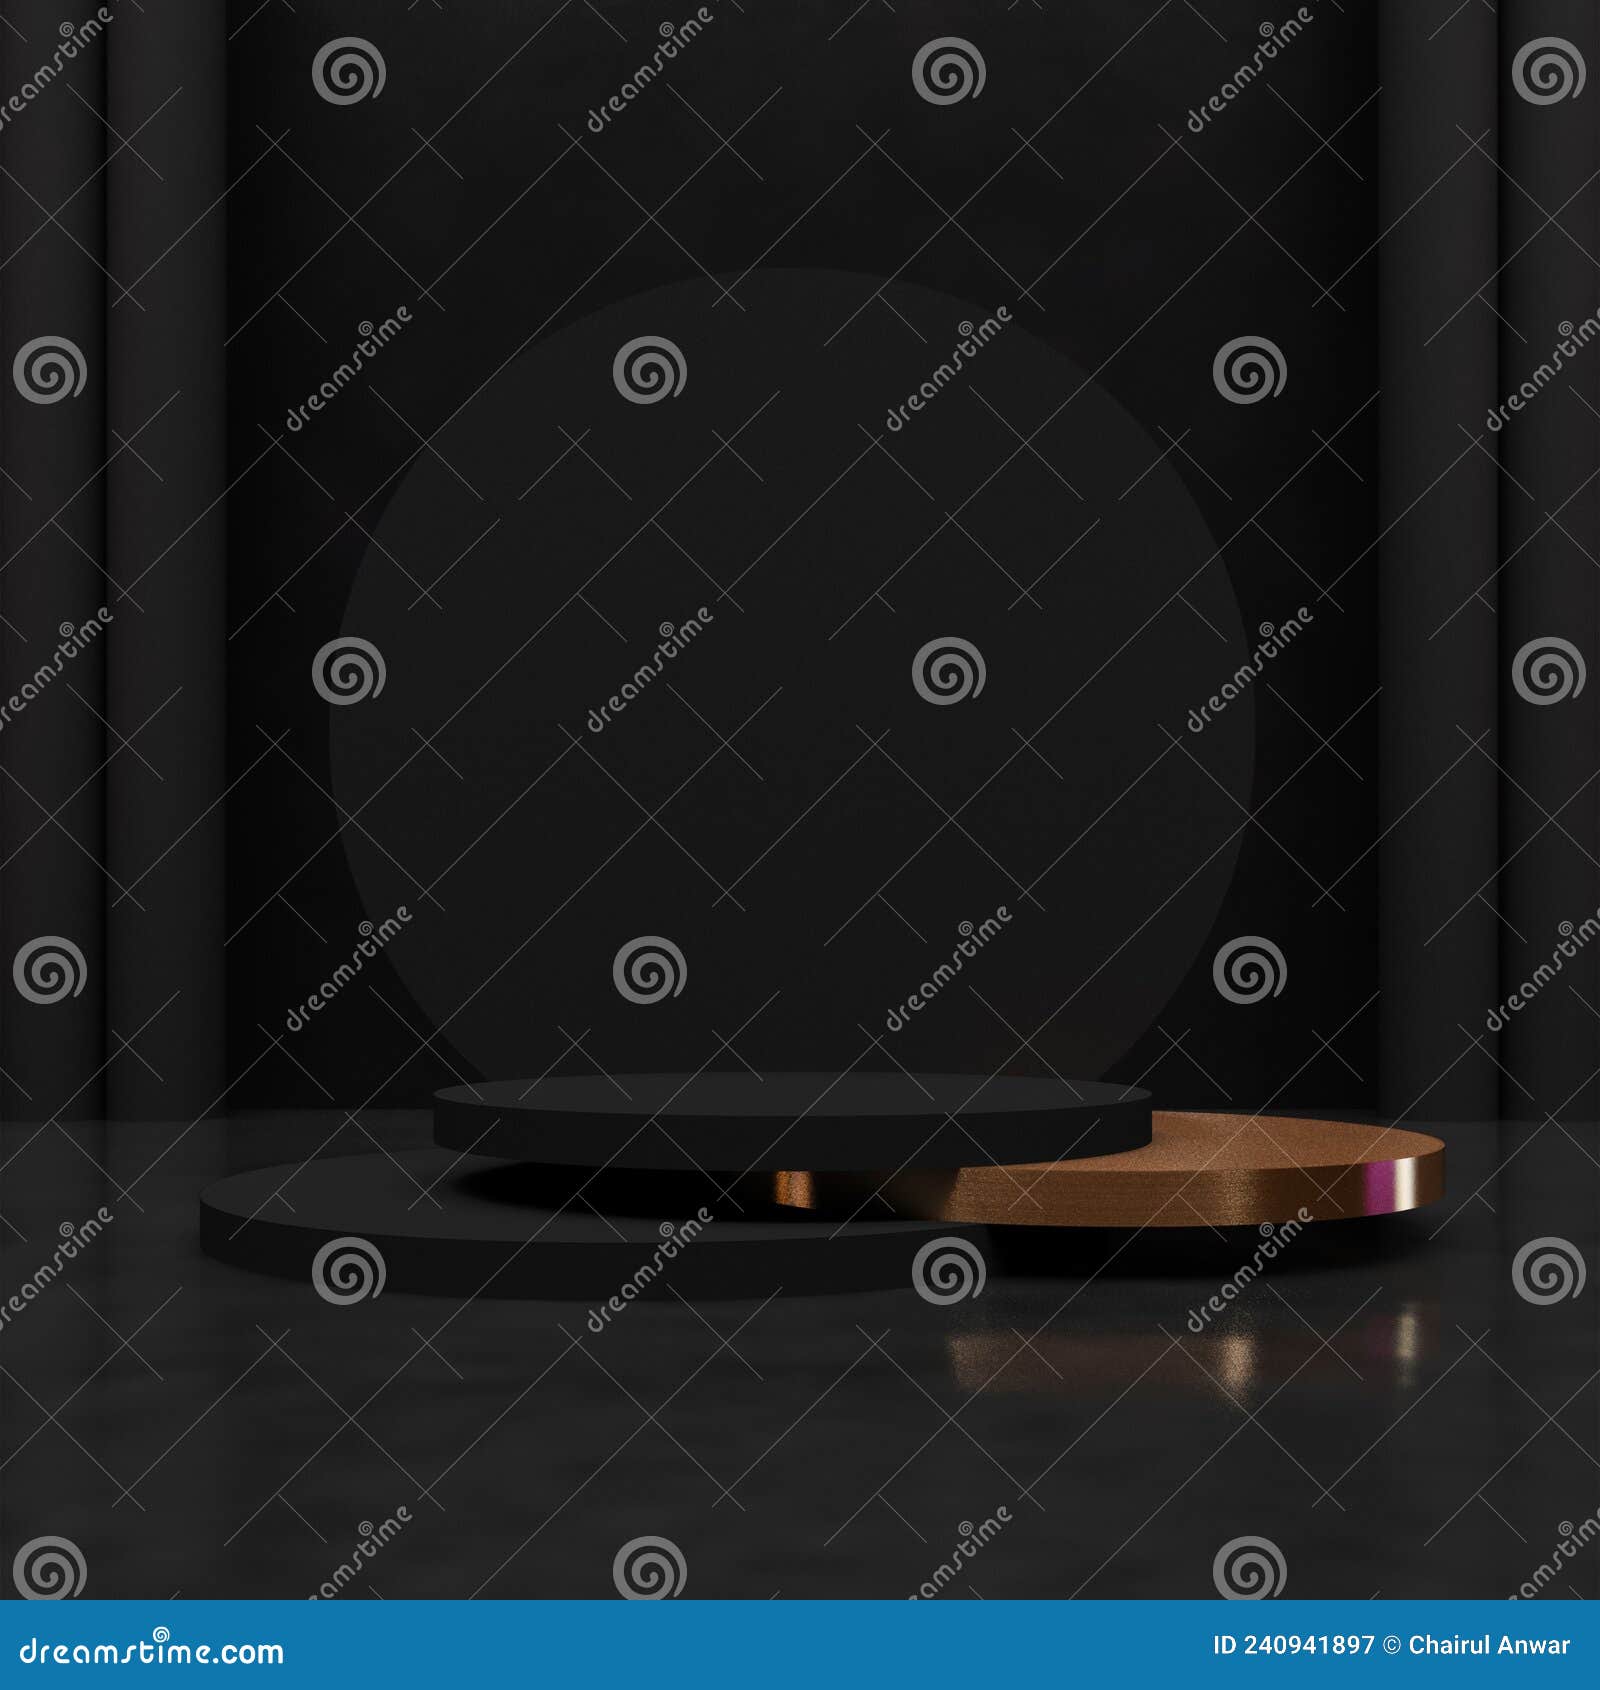 monochrome black podium background for displaying fashion, electronics, aesthetics, cosmetics products in monochrome and gold